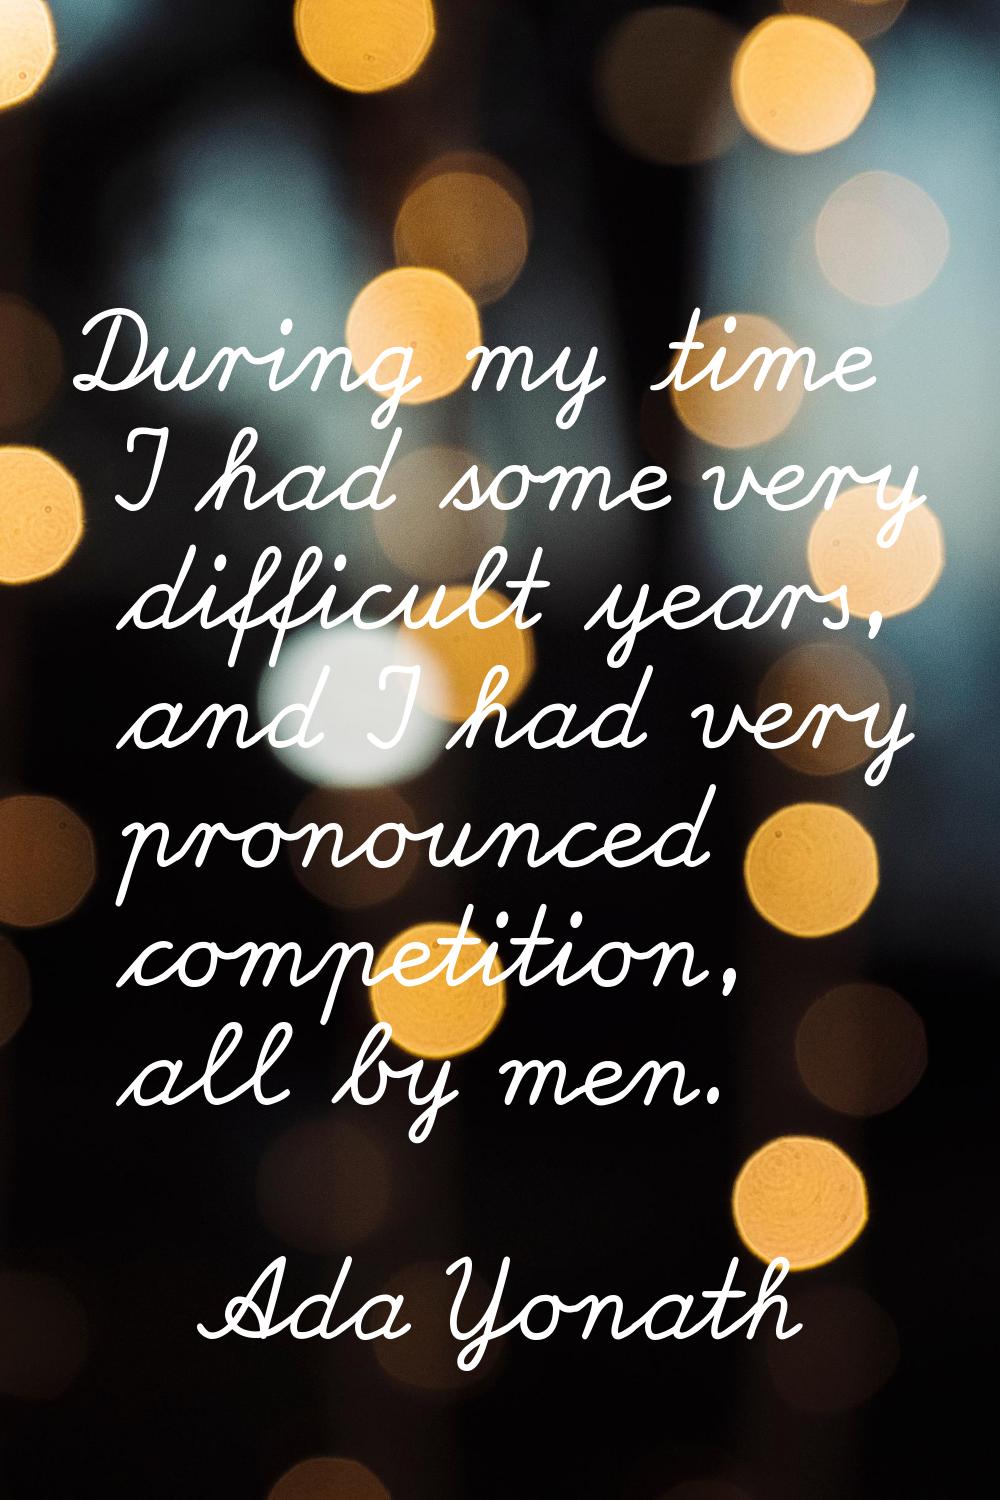 During my time I had some very difficult years, and I had very pronounced competition, all by men.